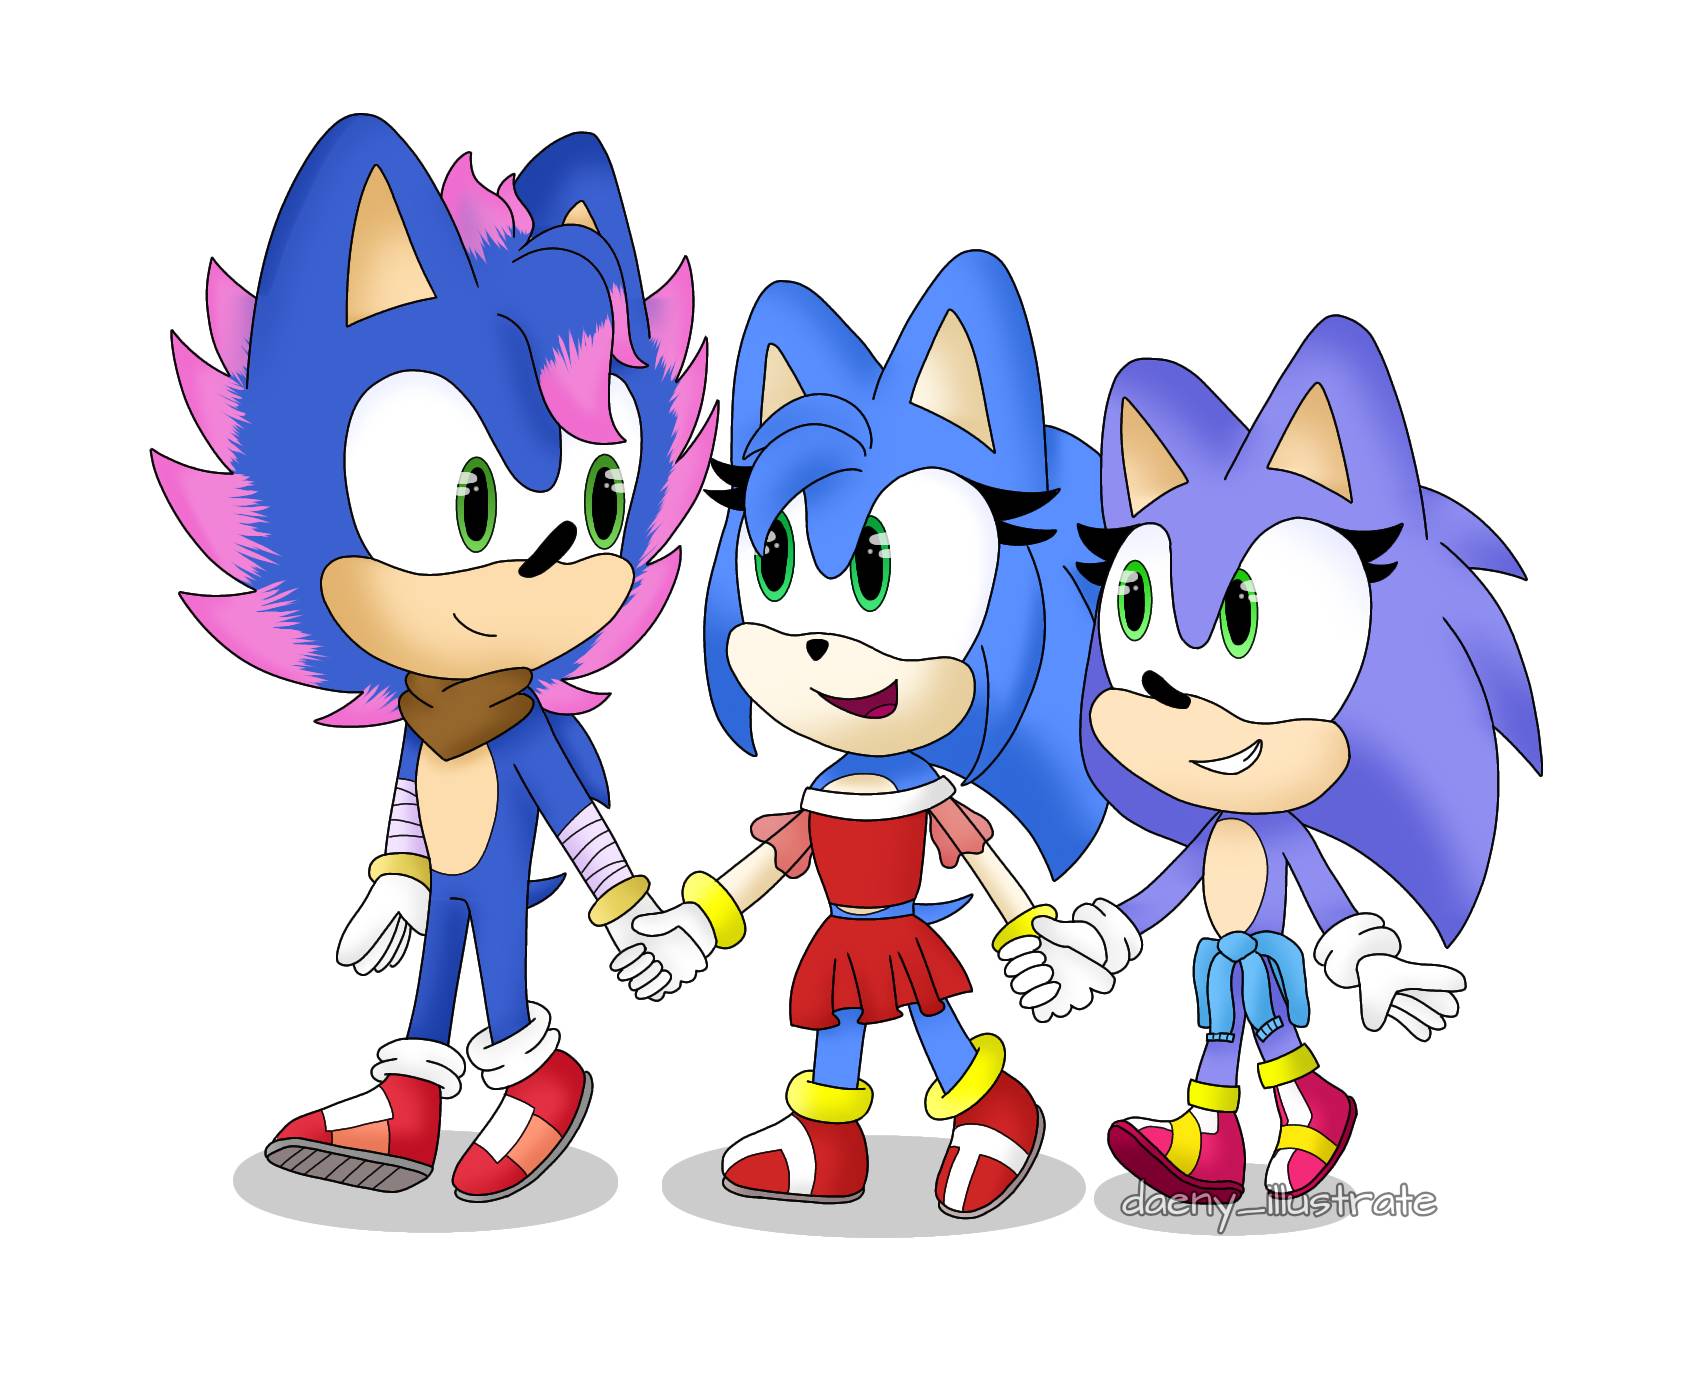 The Next Generation — I wanted to draw my sonamy fanchilds with